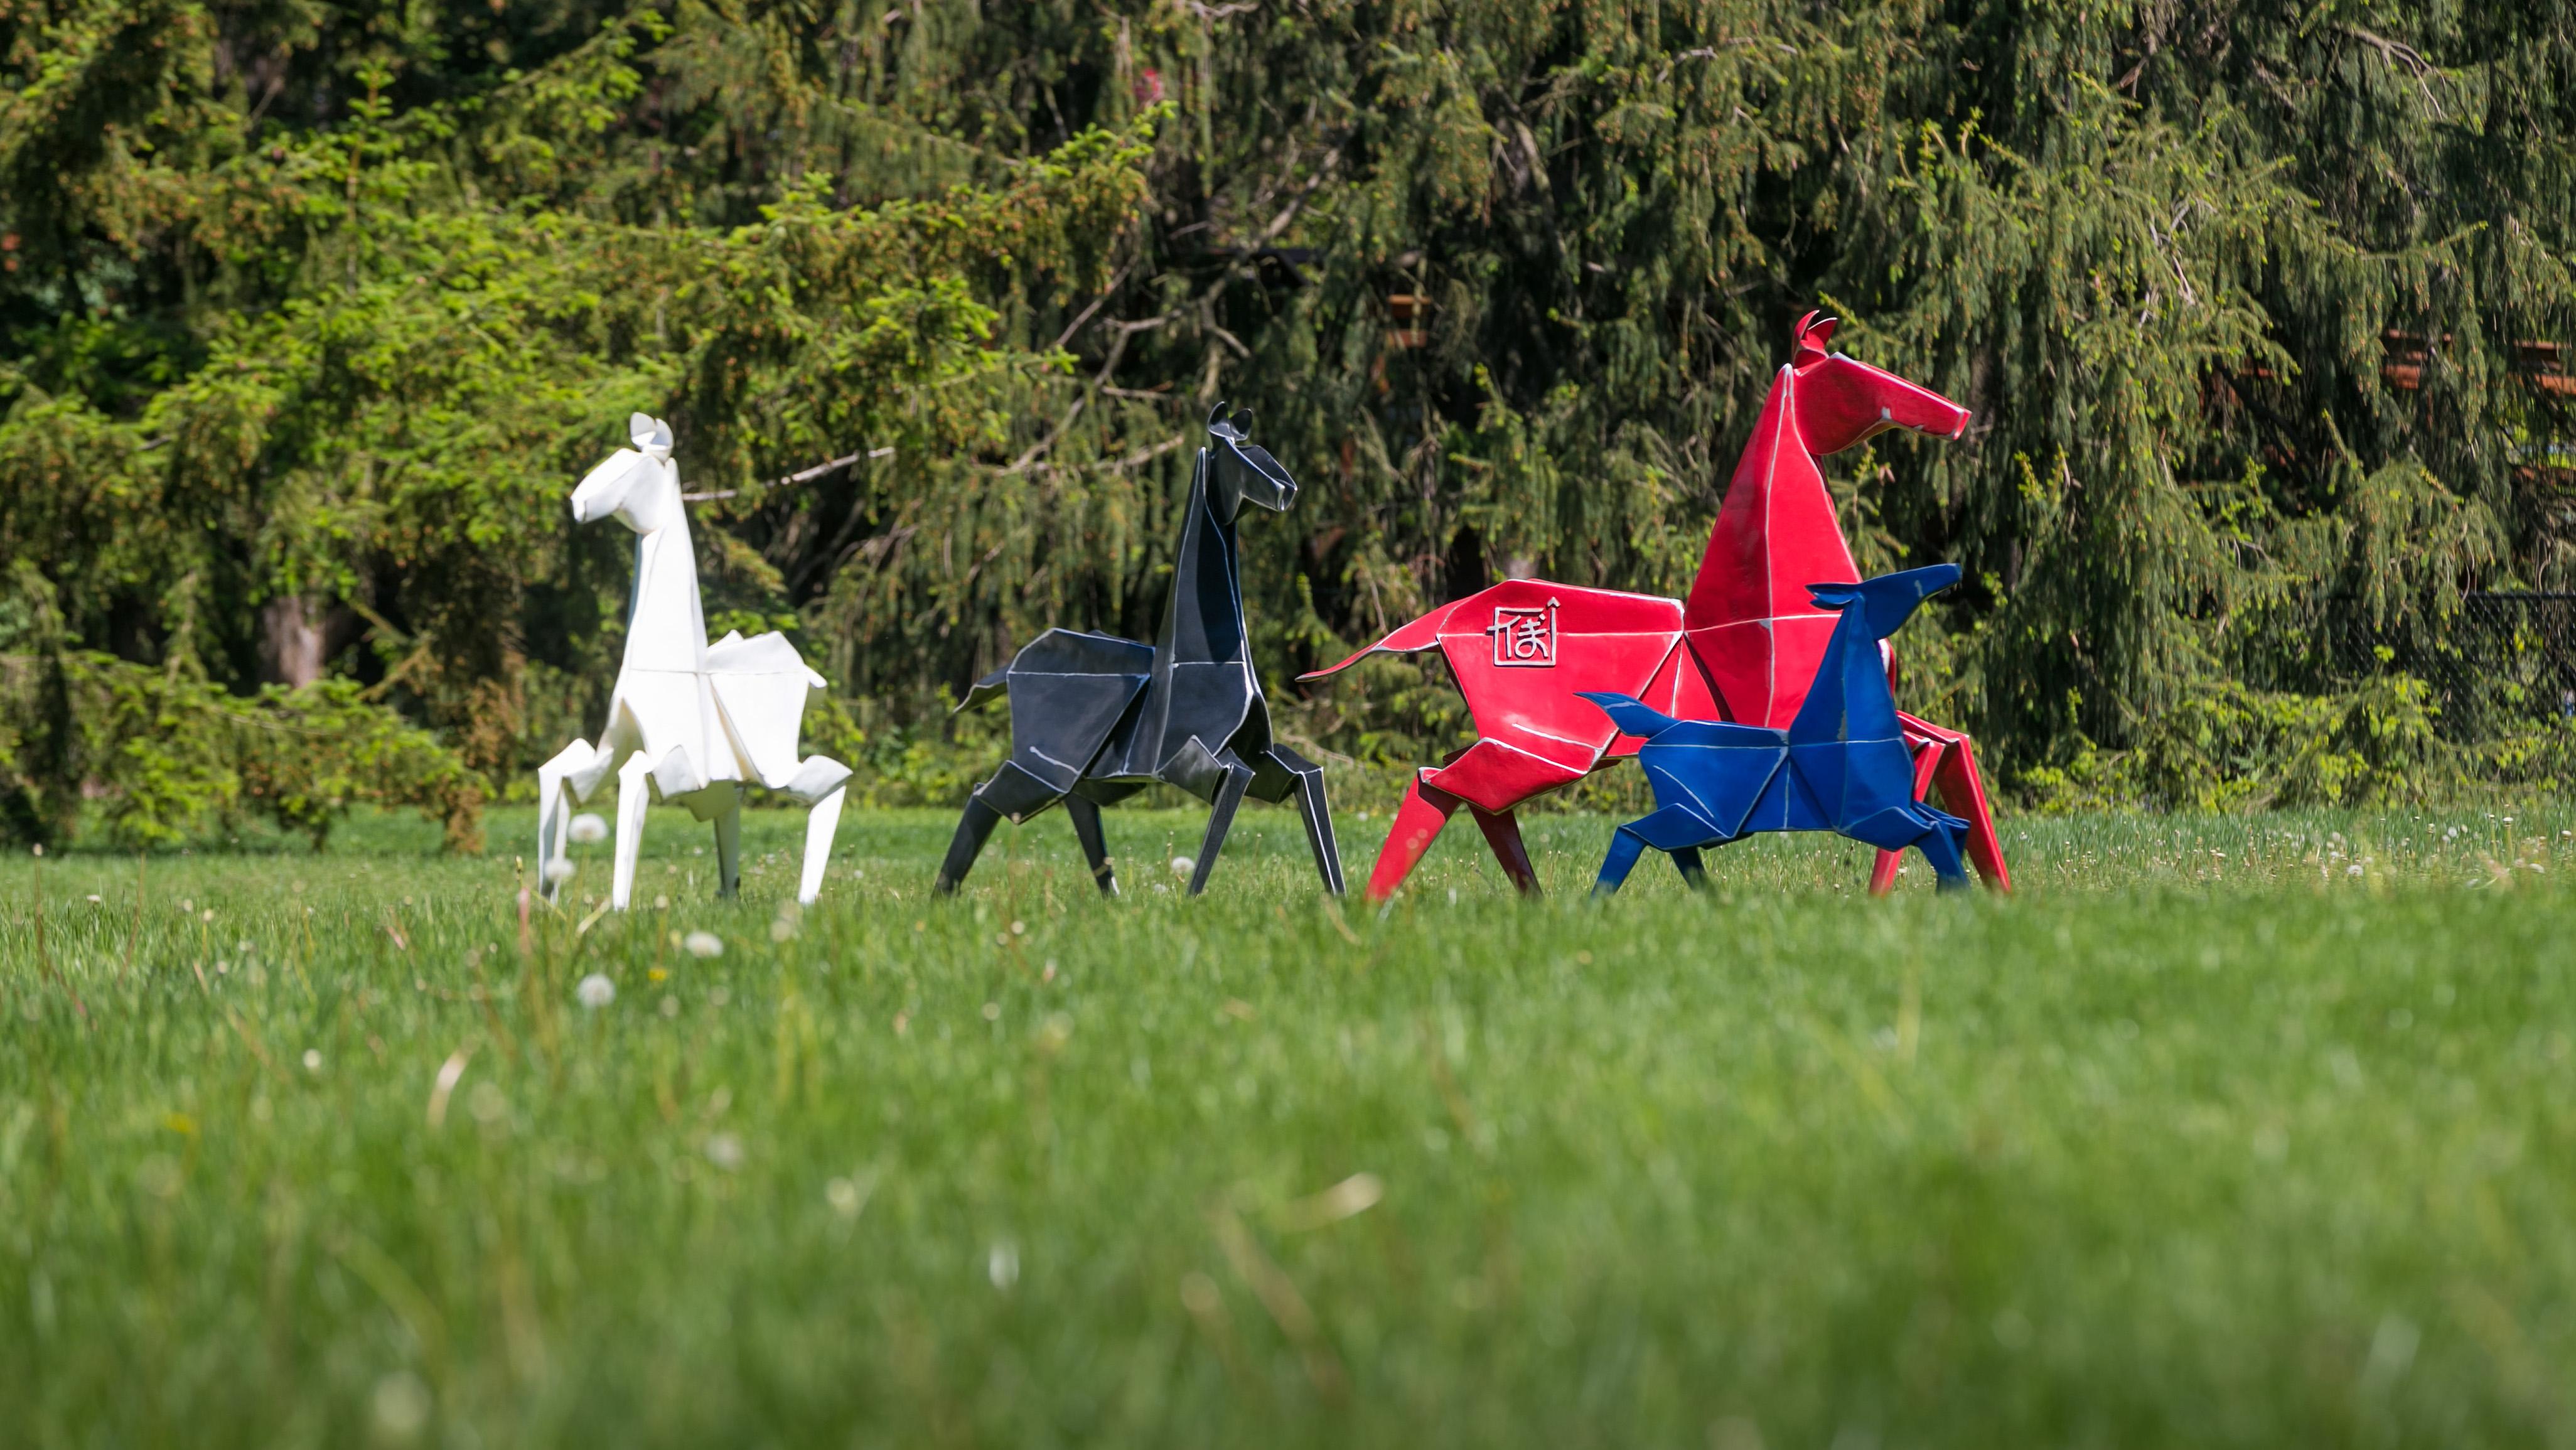 "Painted Ponies" is one of 25 displays debuting at The Morton Arboretum Friday. (Courtesy of The Morton Arboretum)